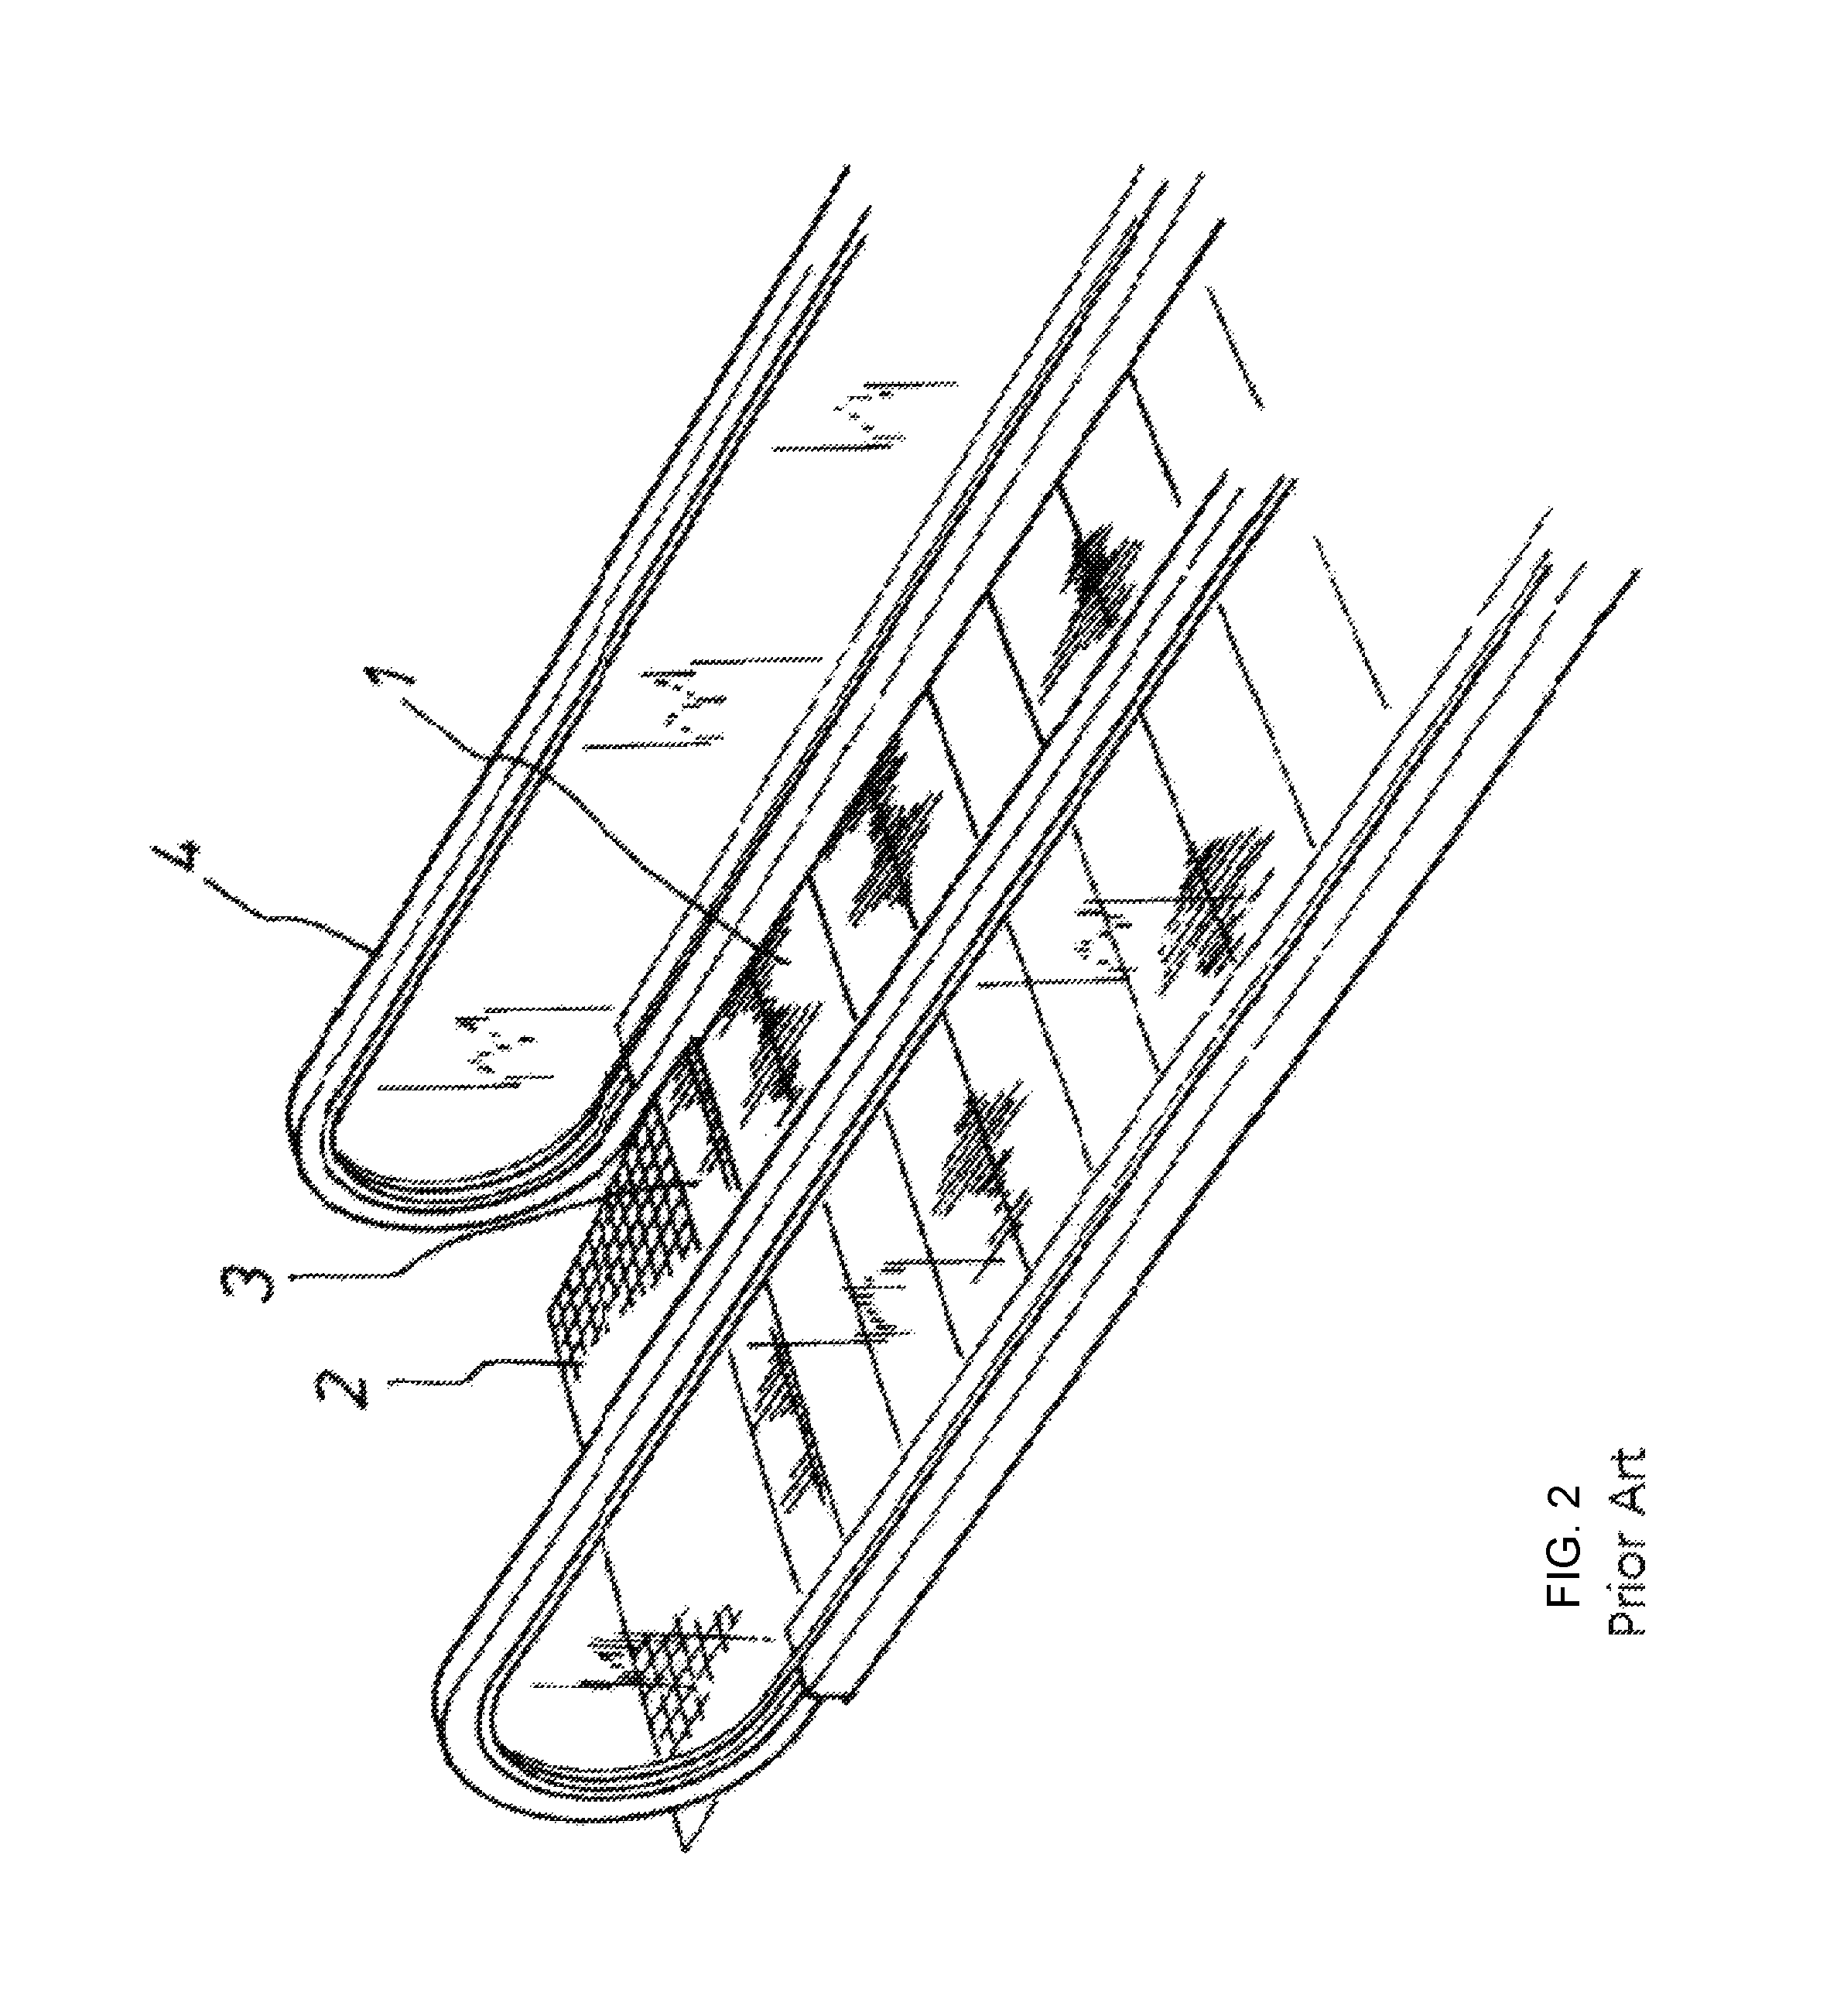 Safety comb plate of escalator